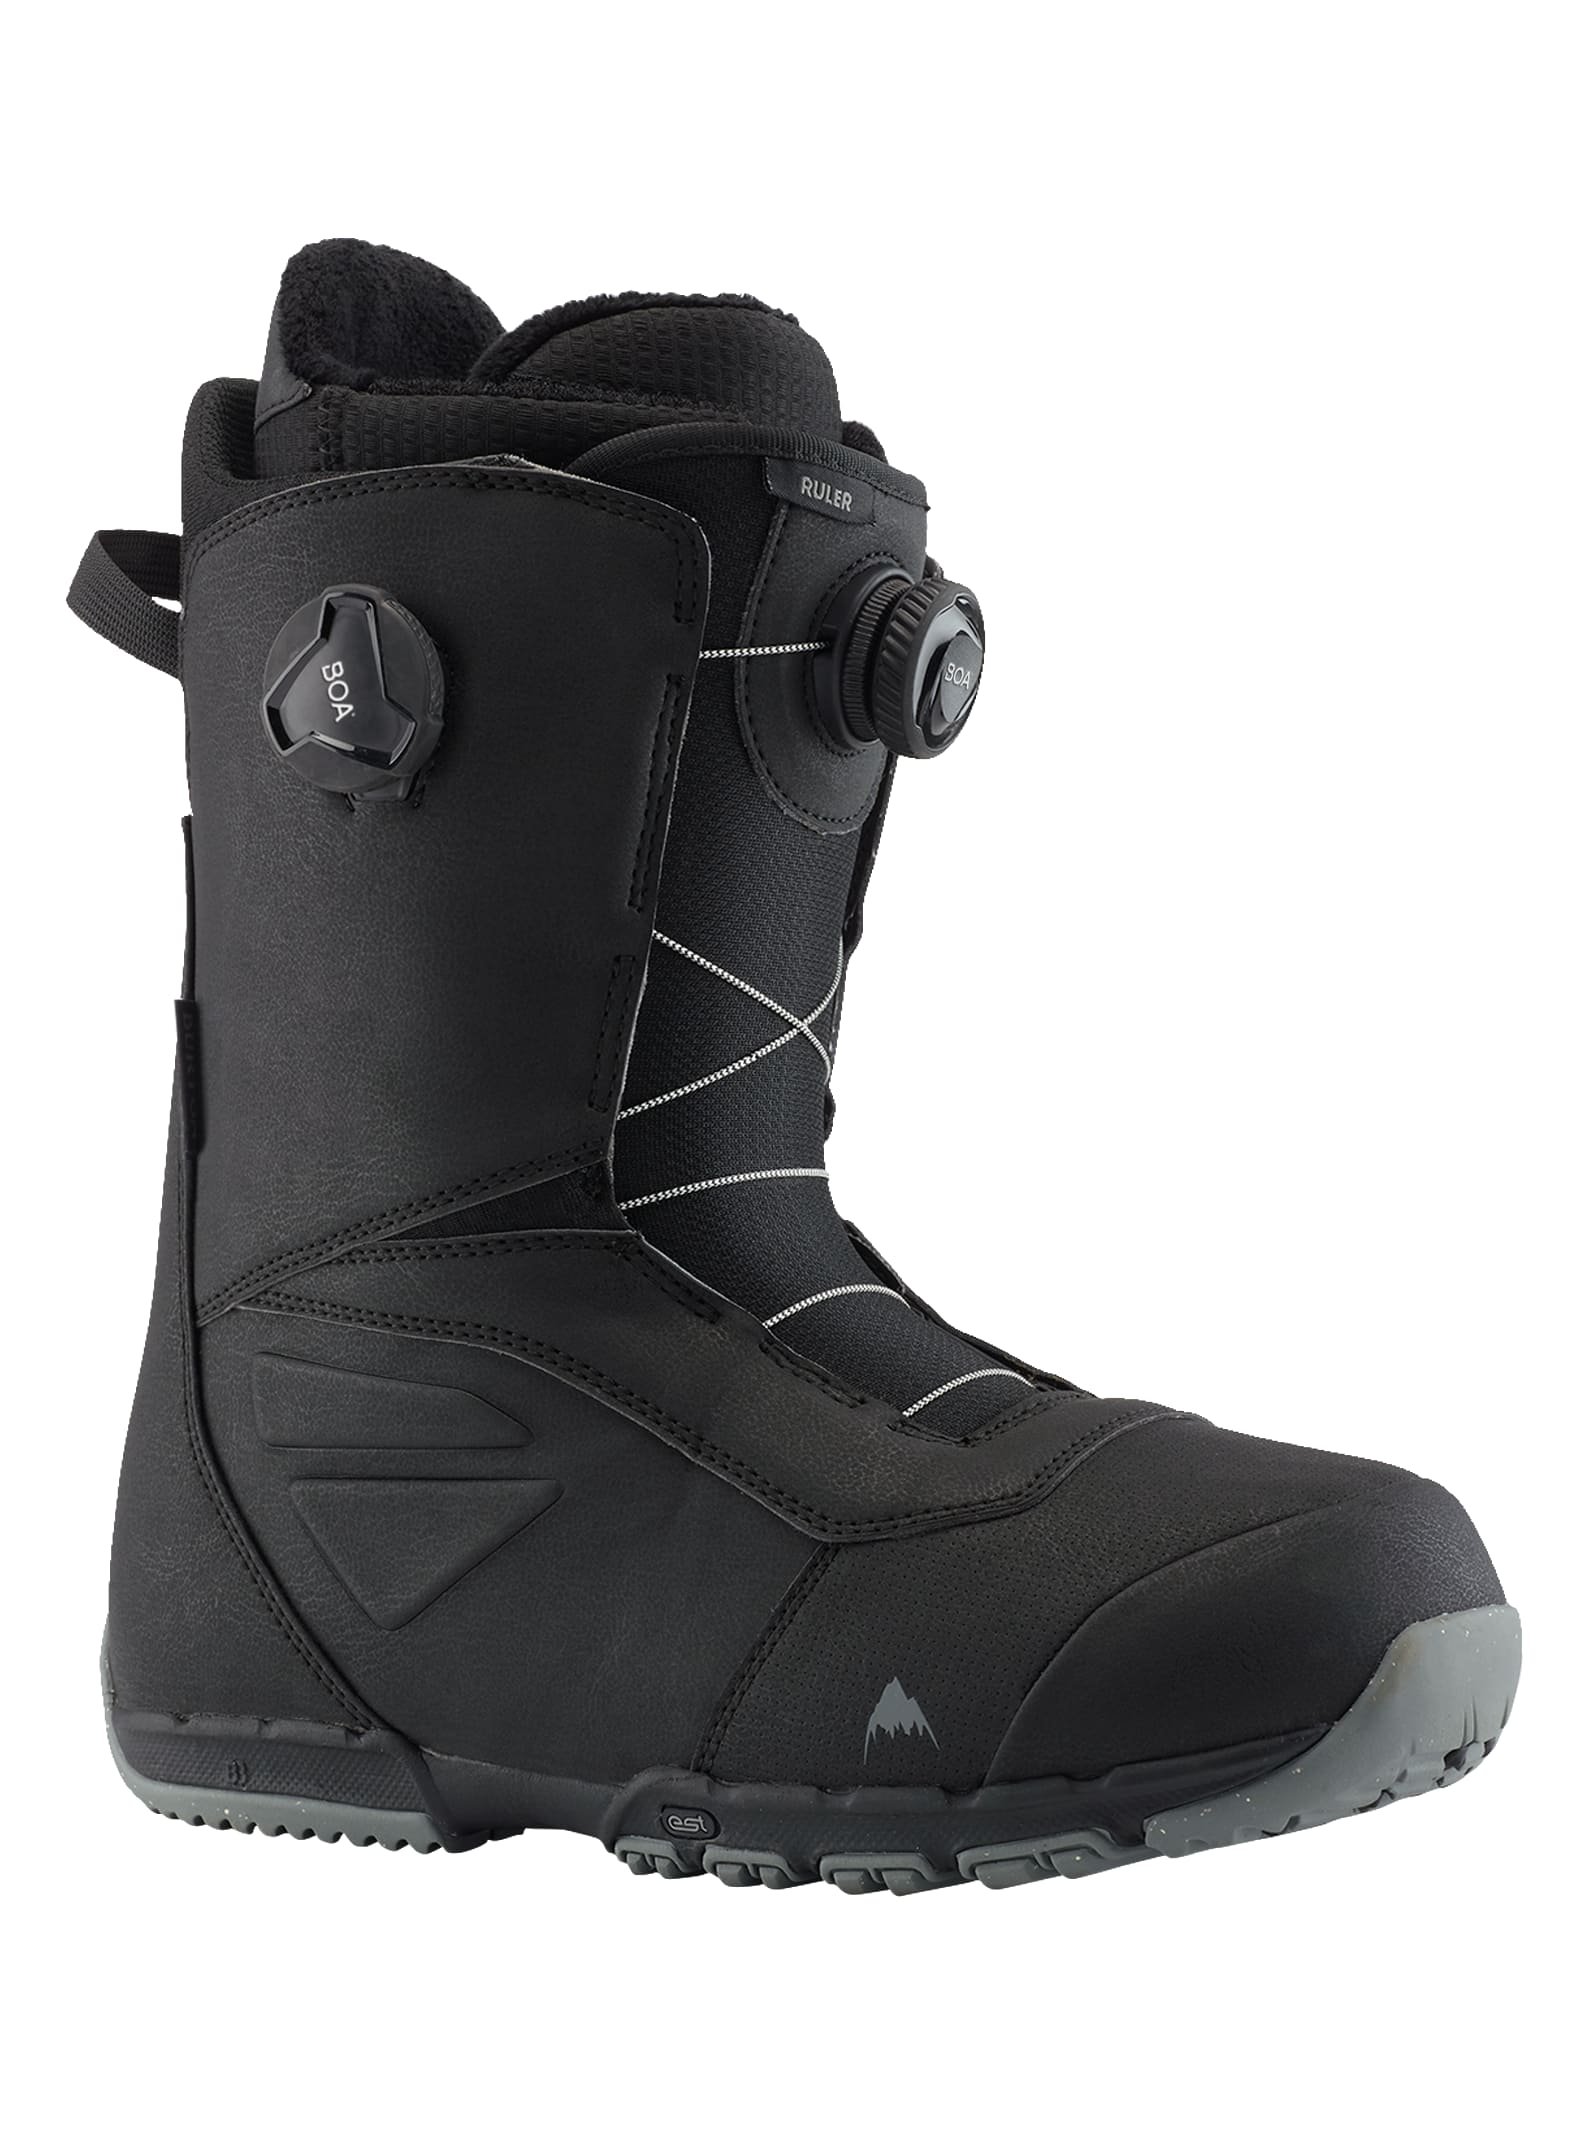 excel suicide Come up with Men's Ruler BOA® Snowboard Boots (Wide) | Burton.com Winter 2023 US